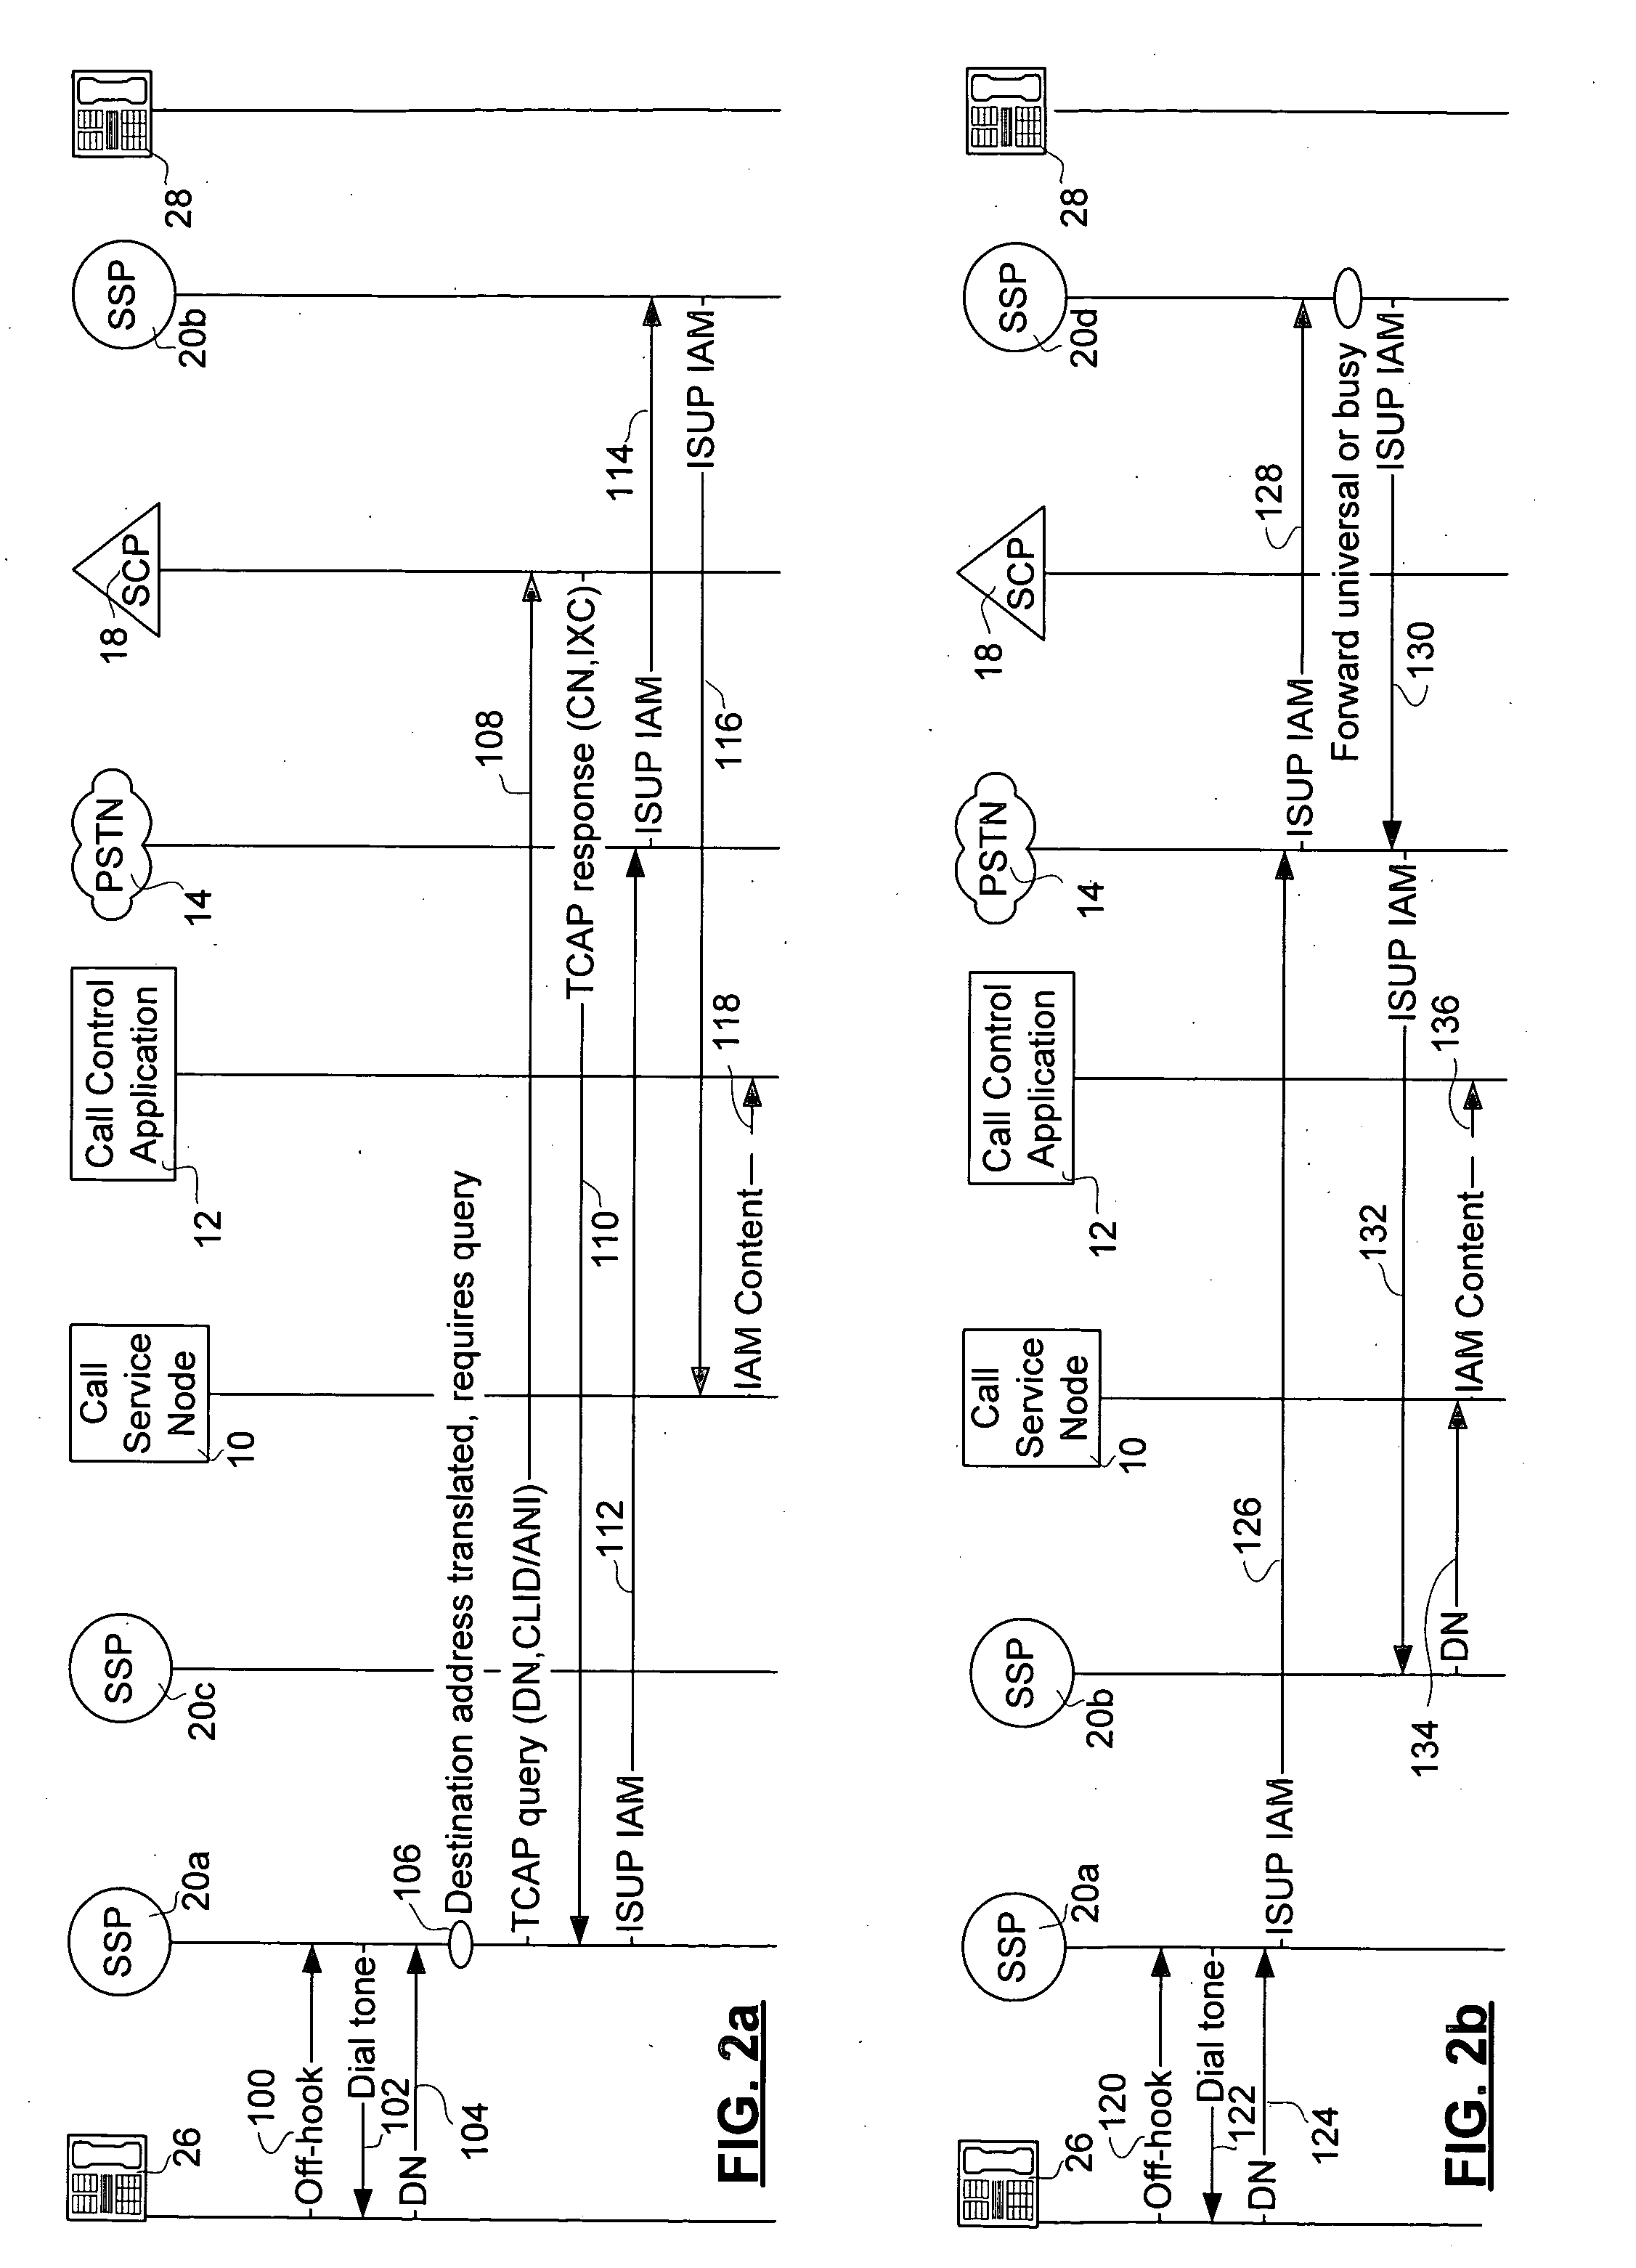 Method and apparatus for subscriber control of an inbound call